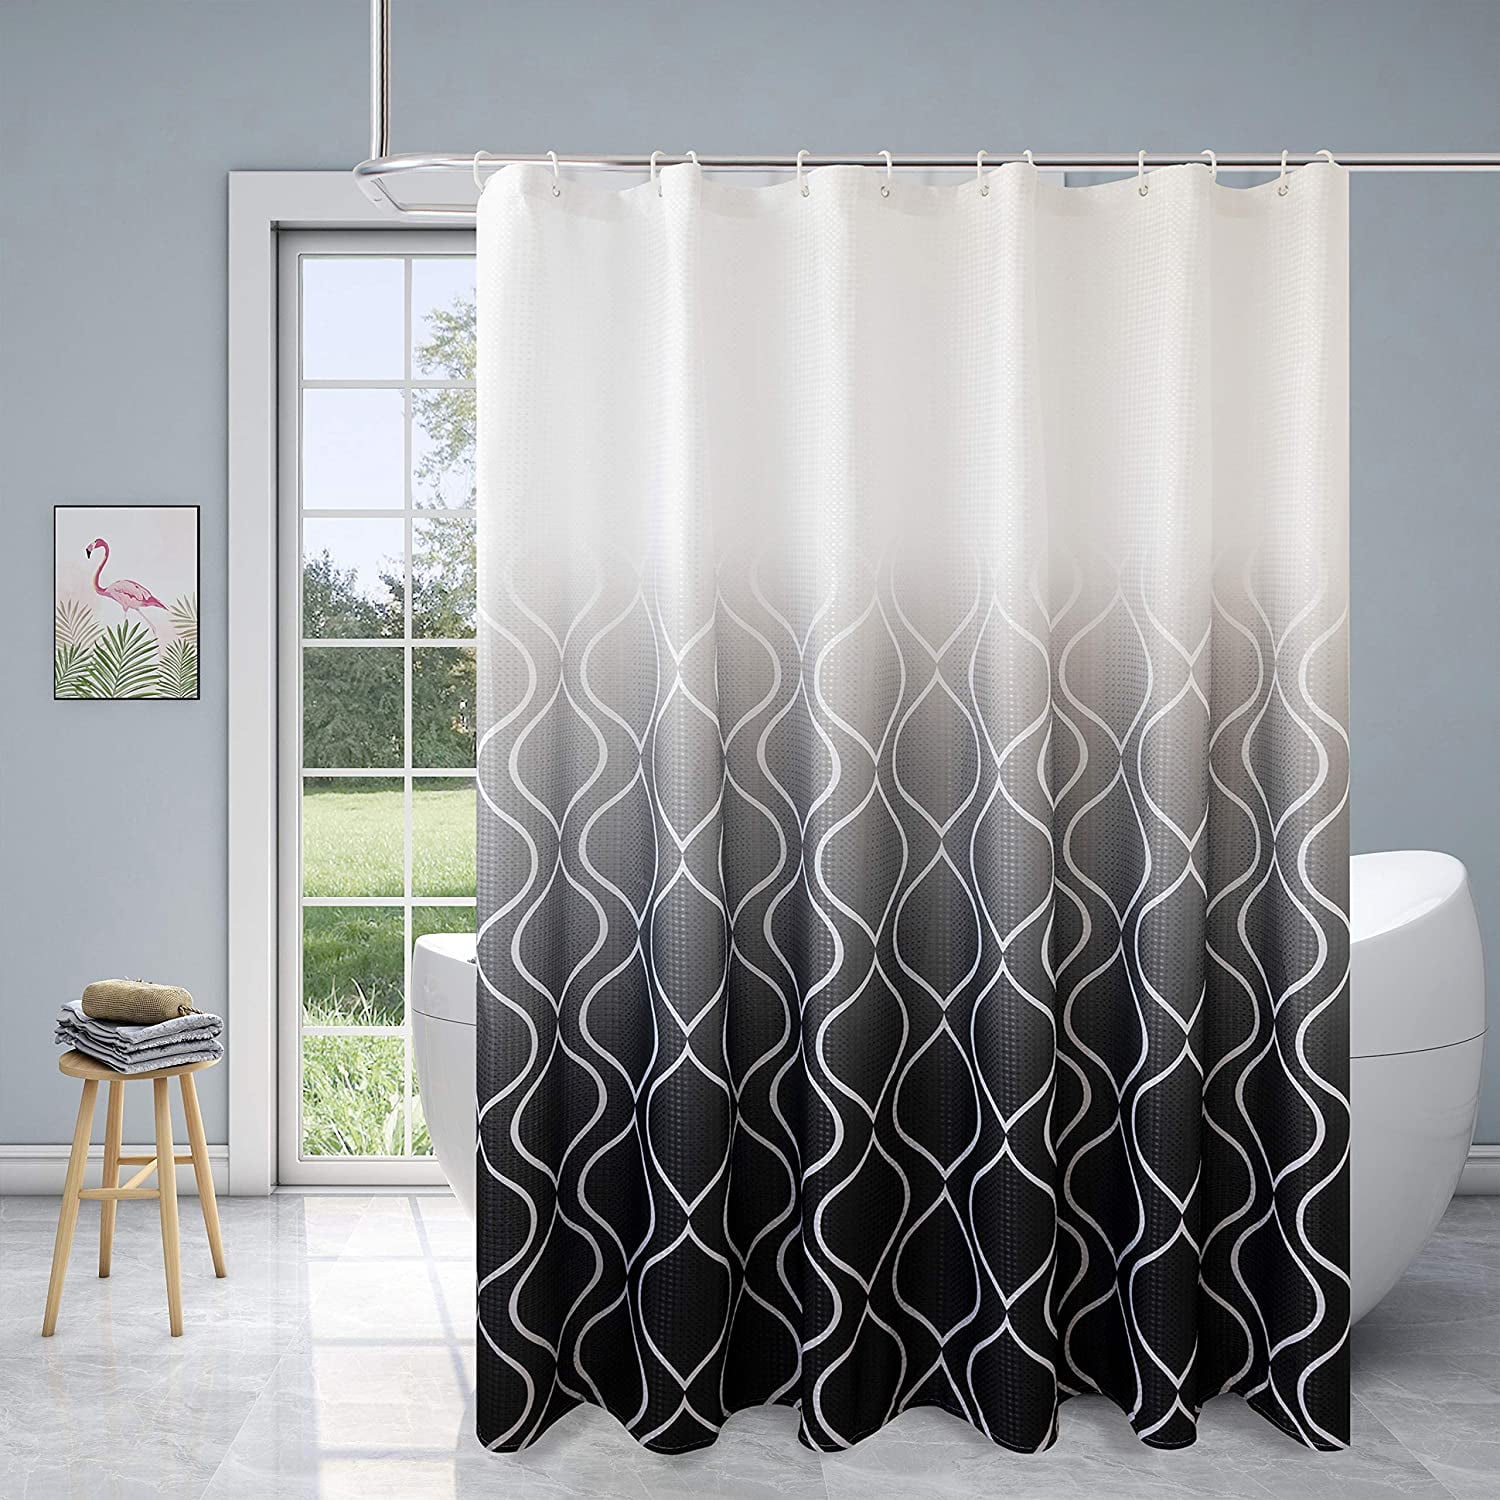 60 x 72 Inch Grey Waterproof Bathroom Curtain with 12 Hooks Xikaywnt Fabric Textured Moroccan Ombre Shower Curtain for Bathroom